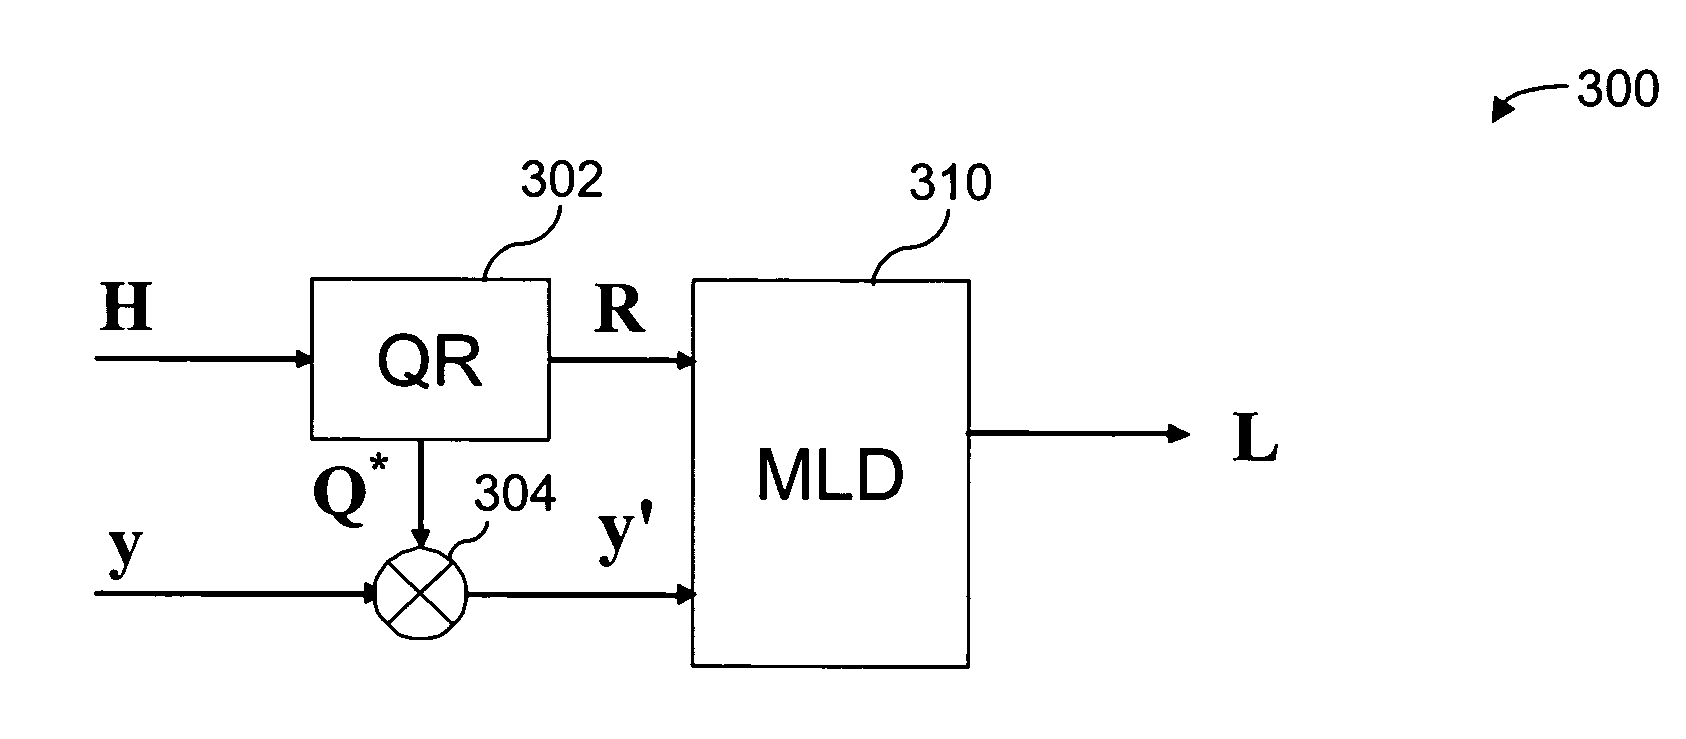 MIMO receiver using maximum likelihood detector in combination with QR decomposition